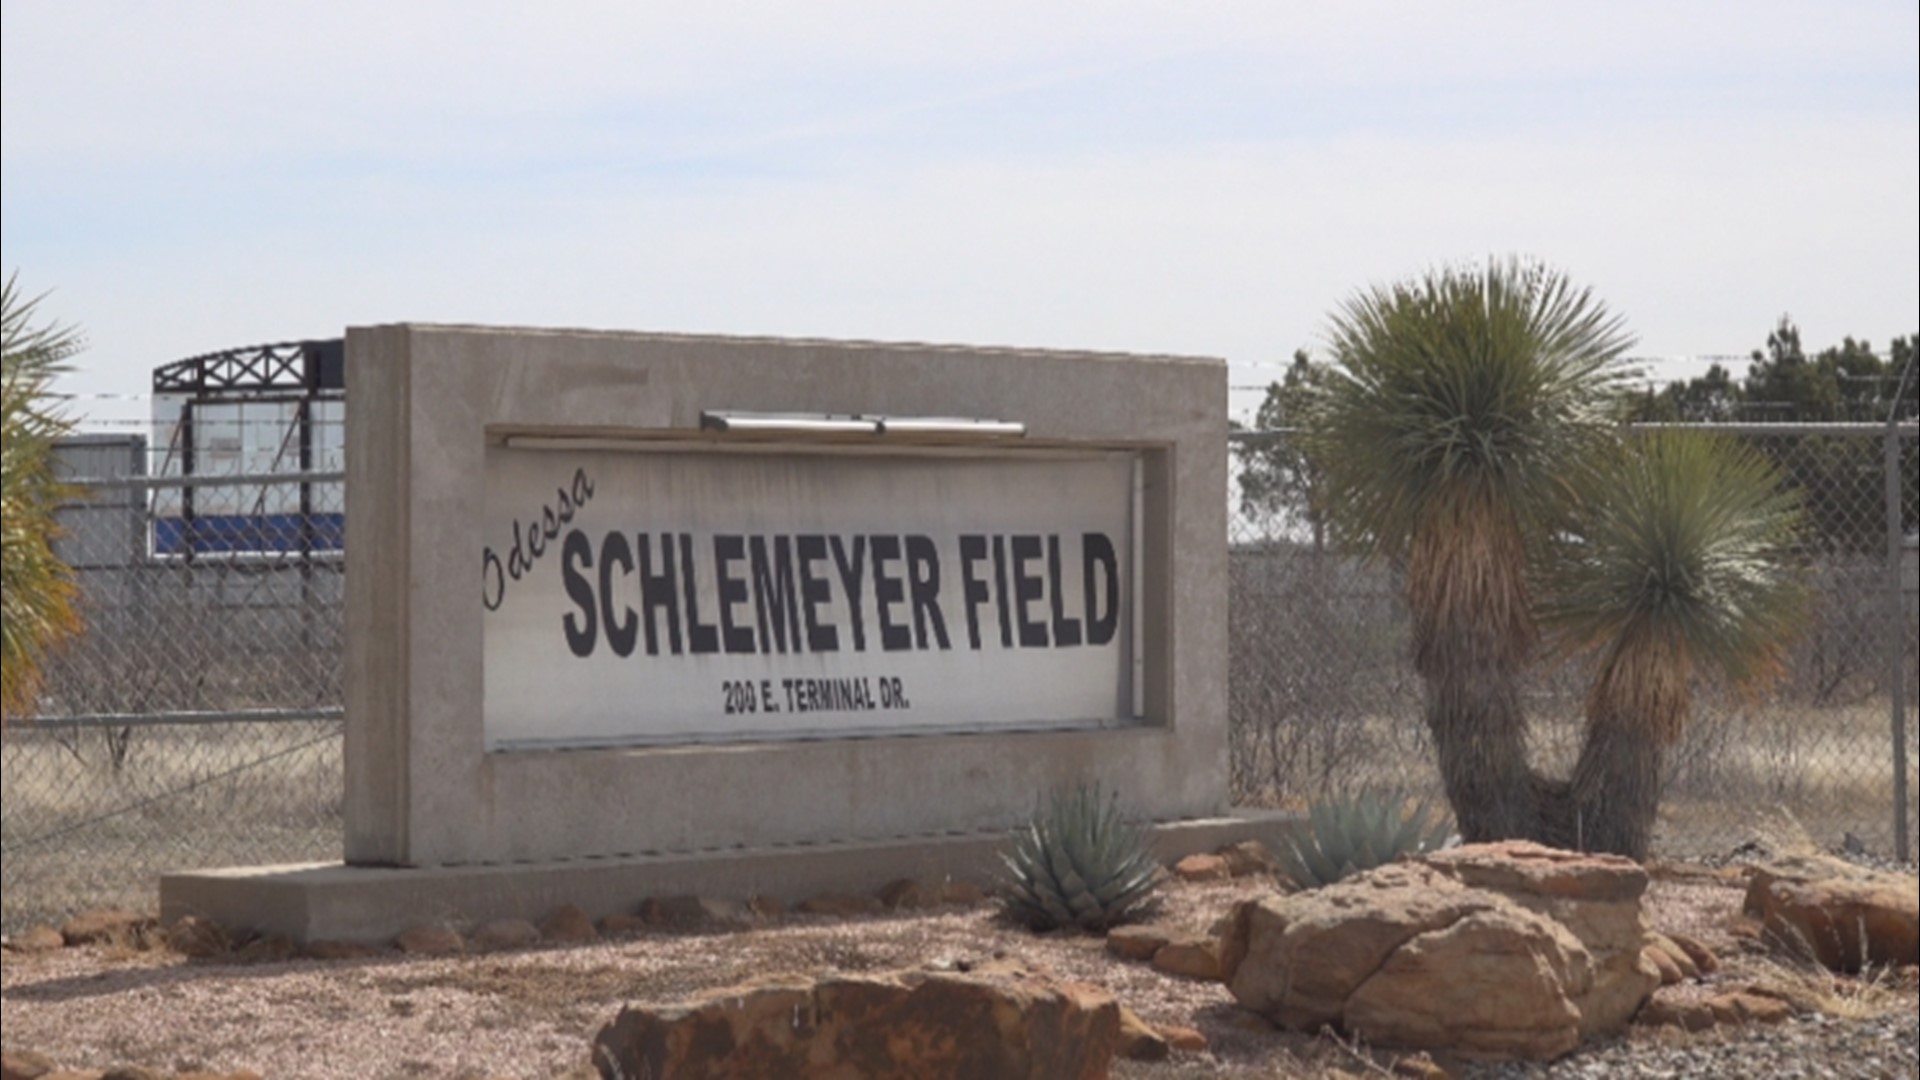 $15 million would go to Ector County to bring general improvements to the Schlemeyer Airport.